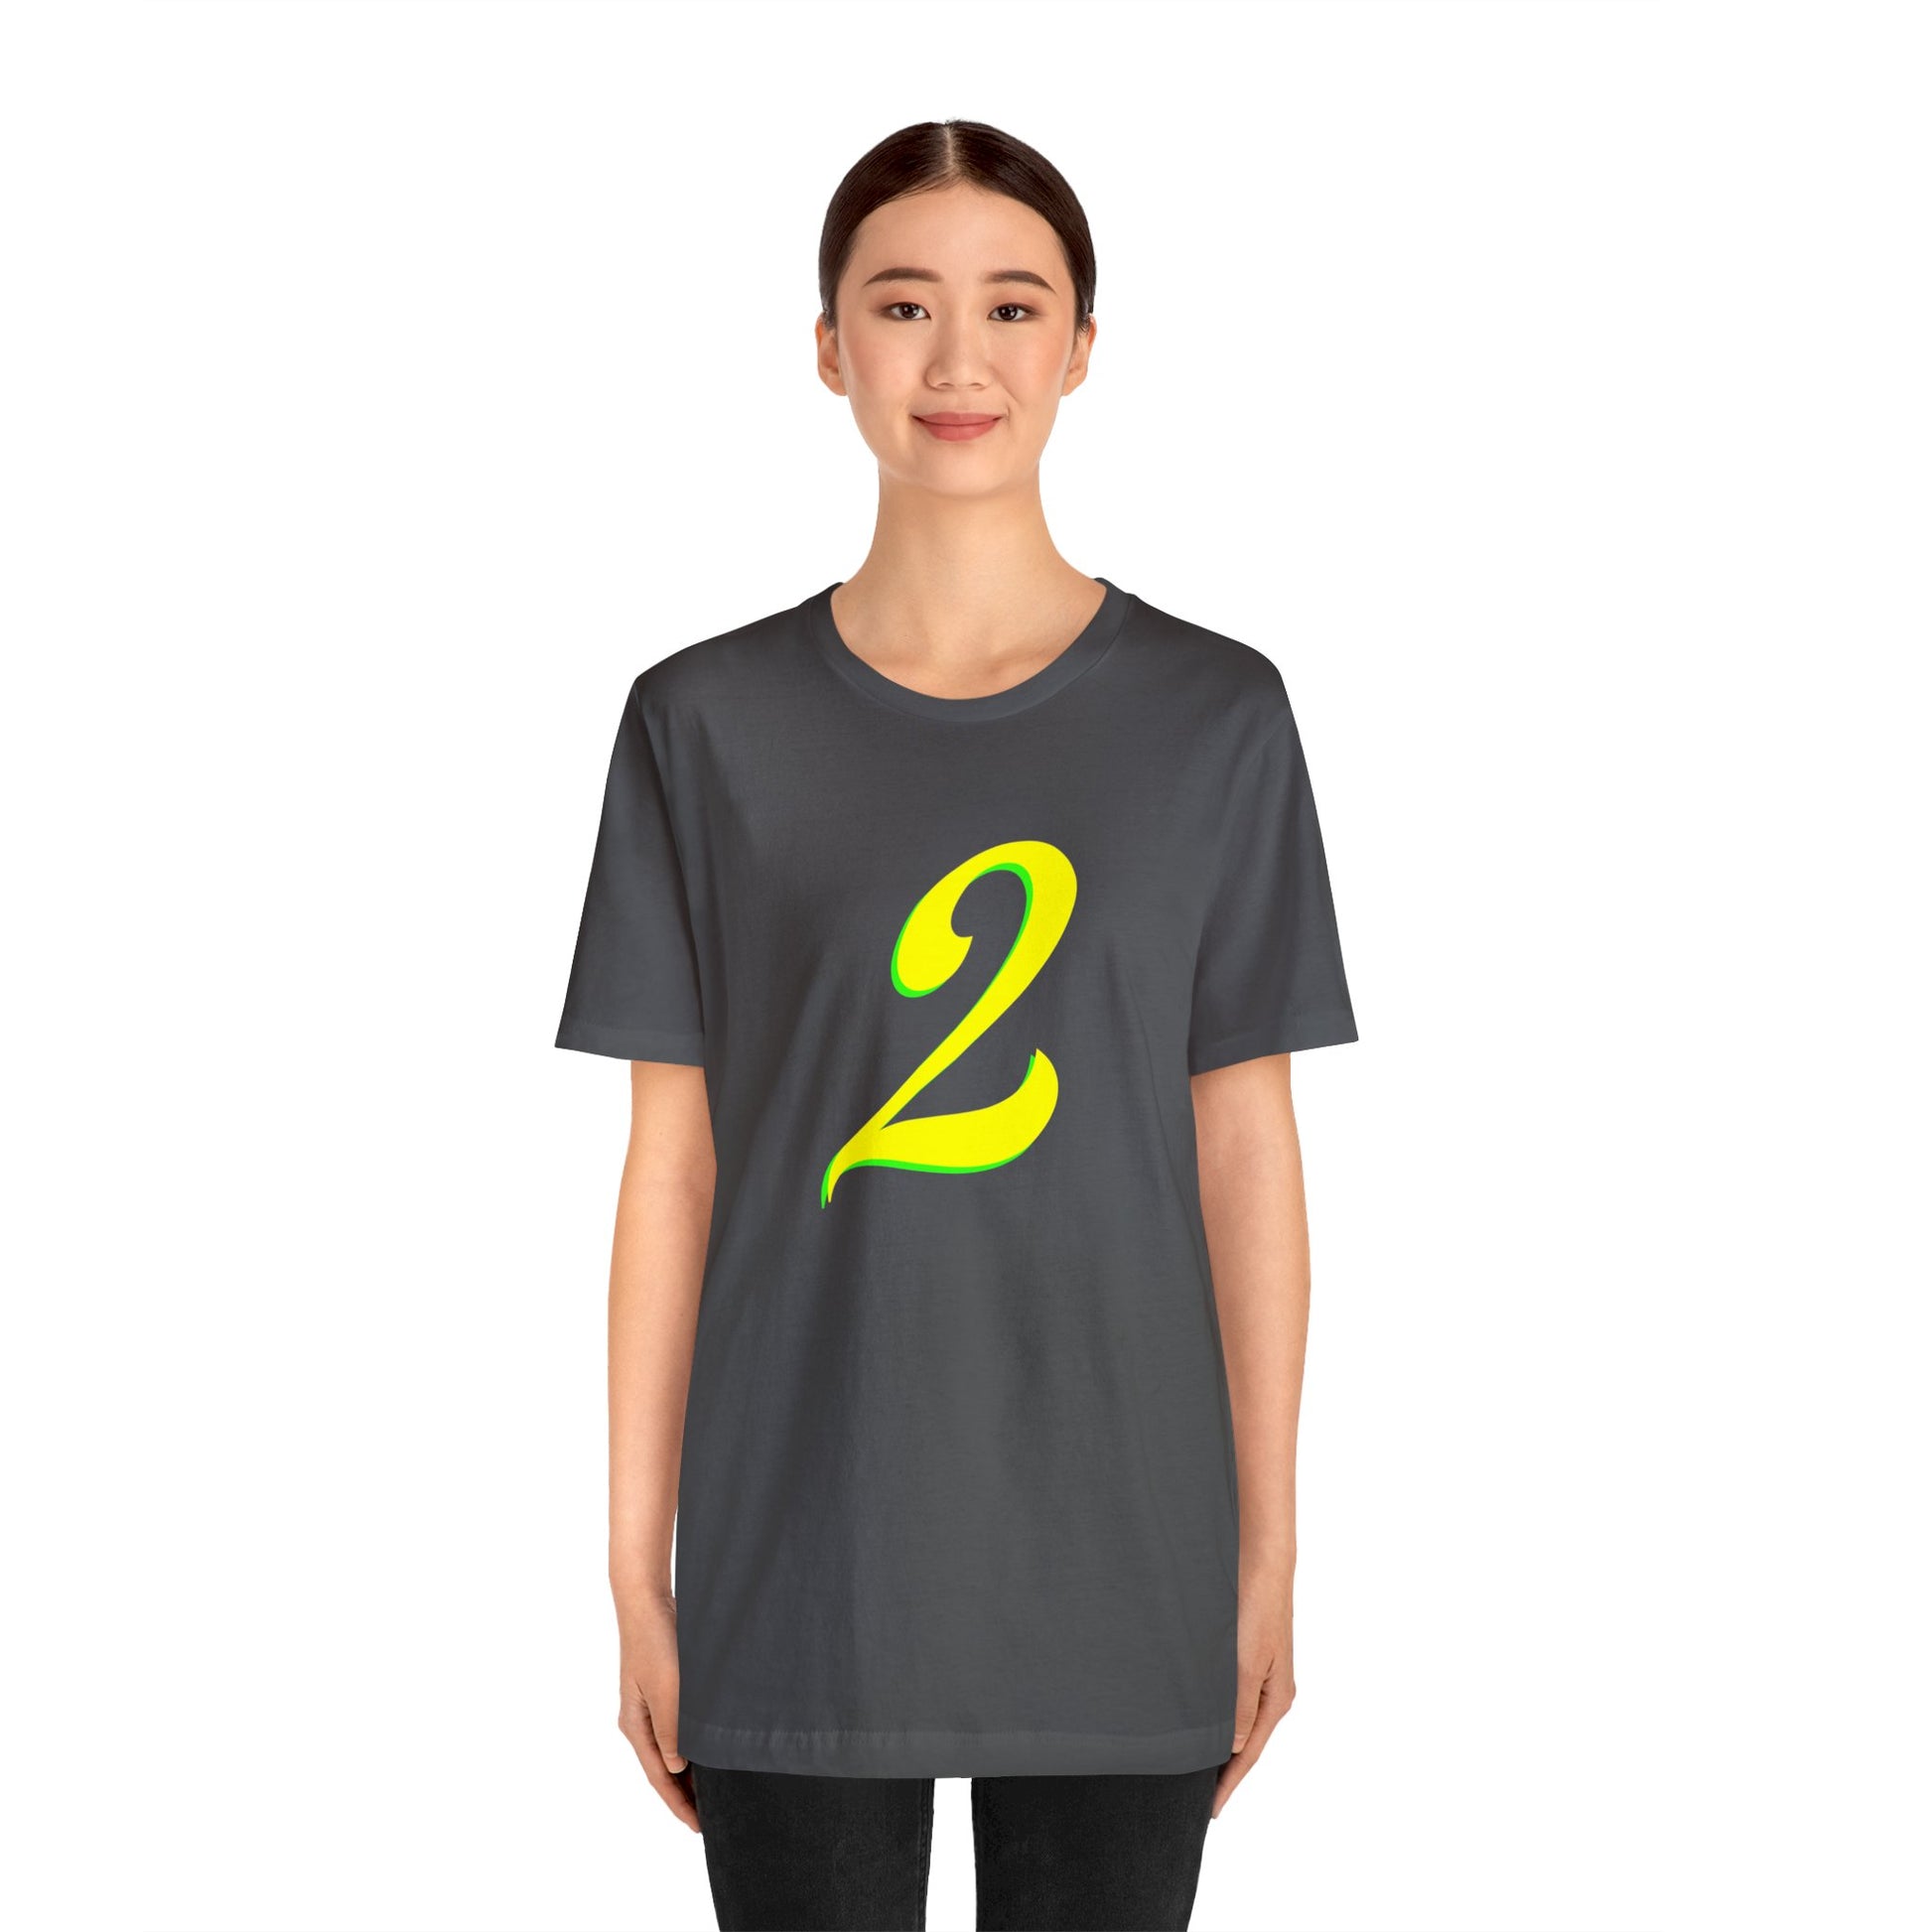 Number 2 Design - Soft Cotton Tee for birthdays and celebrations, Gift for friends and family, Multiple Options by clothezy.com in Asphalt Size Medium - Buy Now